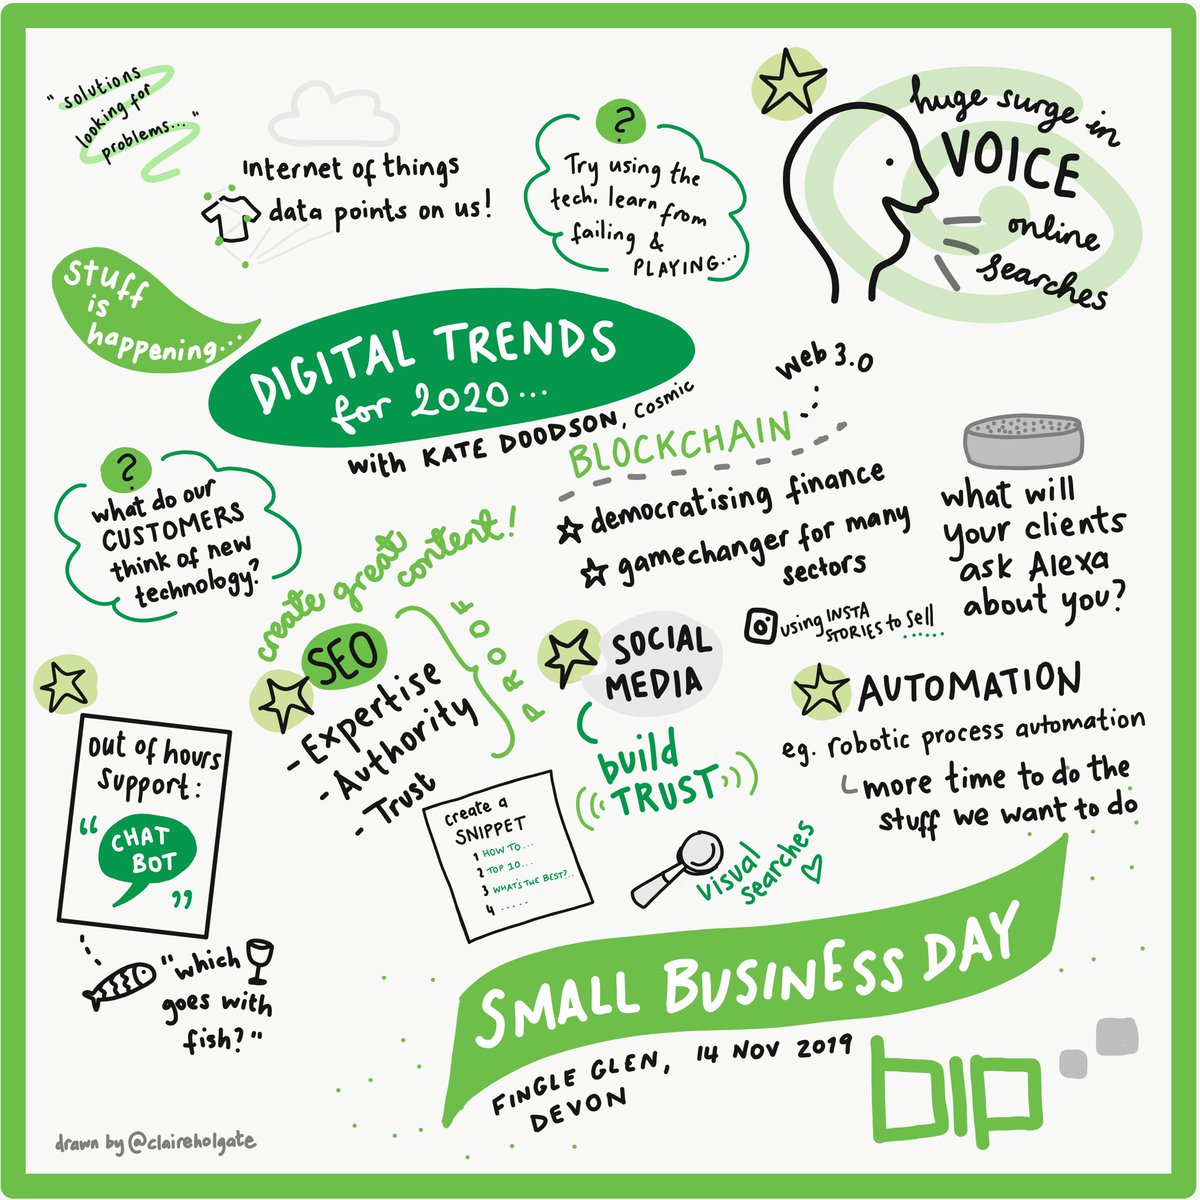 ...& finally, an interesting and jam-packed session on DIGITAL TRENDS from Kate Doodson of @Cosmic_UK #smallbusinessday @BIPsouthwest